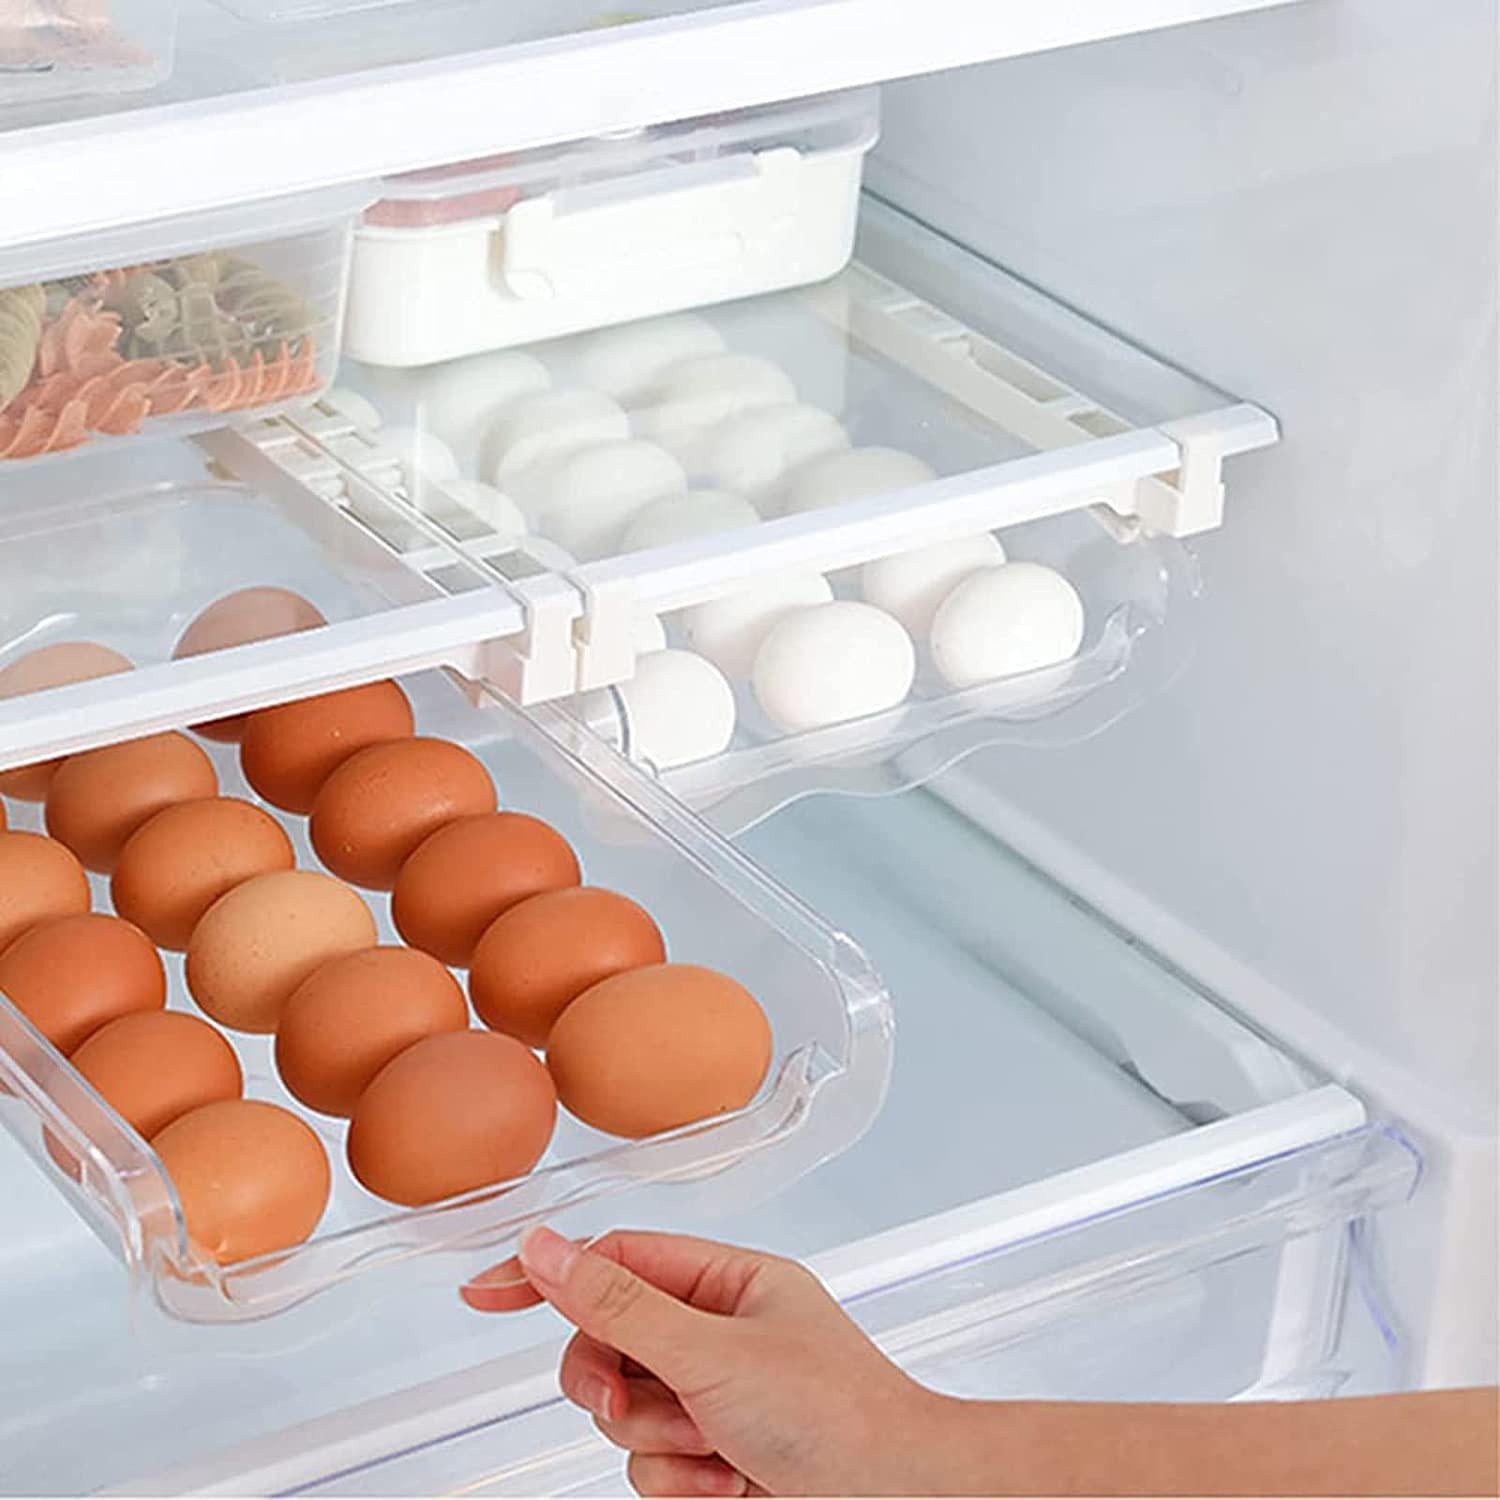 ESMAVO, Egg Holder for Refrigerator, Thicker Egg Tray BPA Free Kitchen Stackable Storage Container Tray, Pull Out Fridge Drawer Egg Organizers, Space Saver for Refrigerator